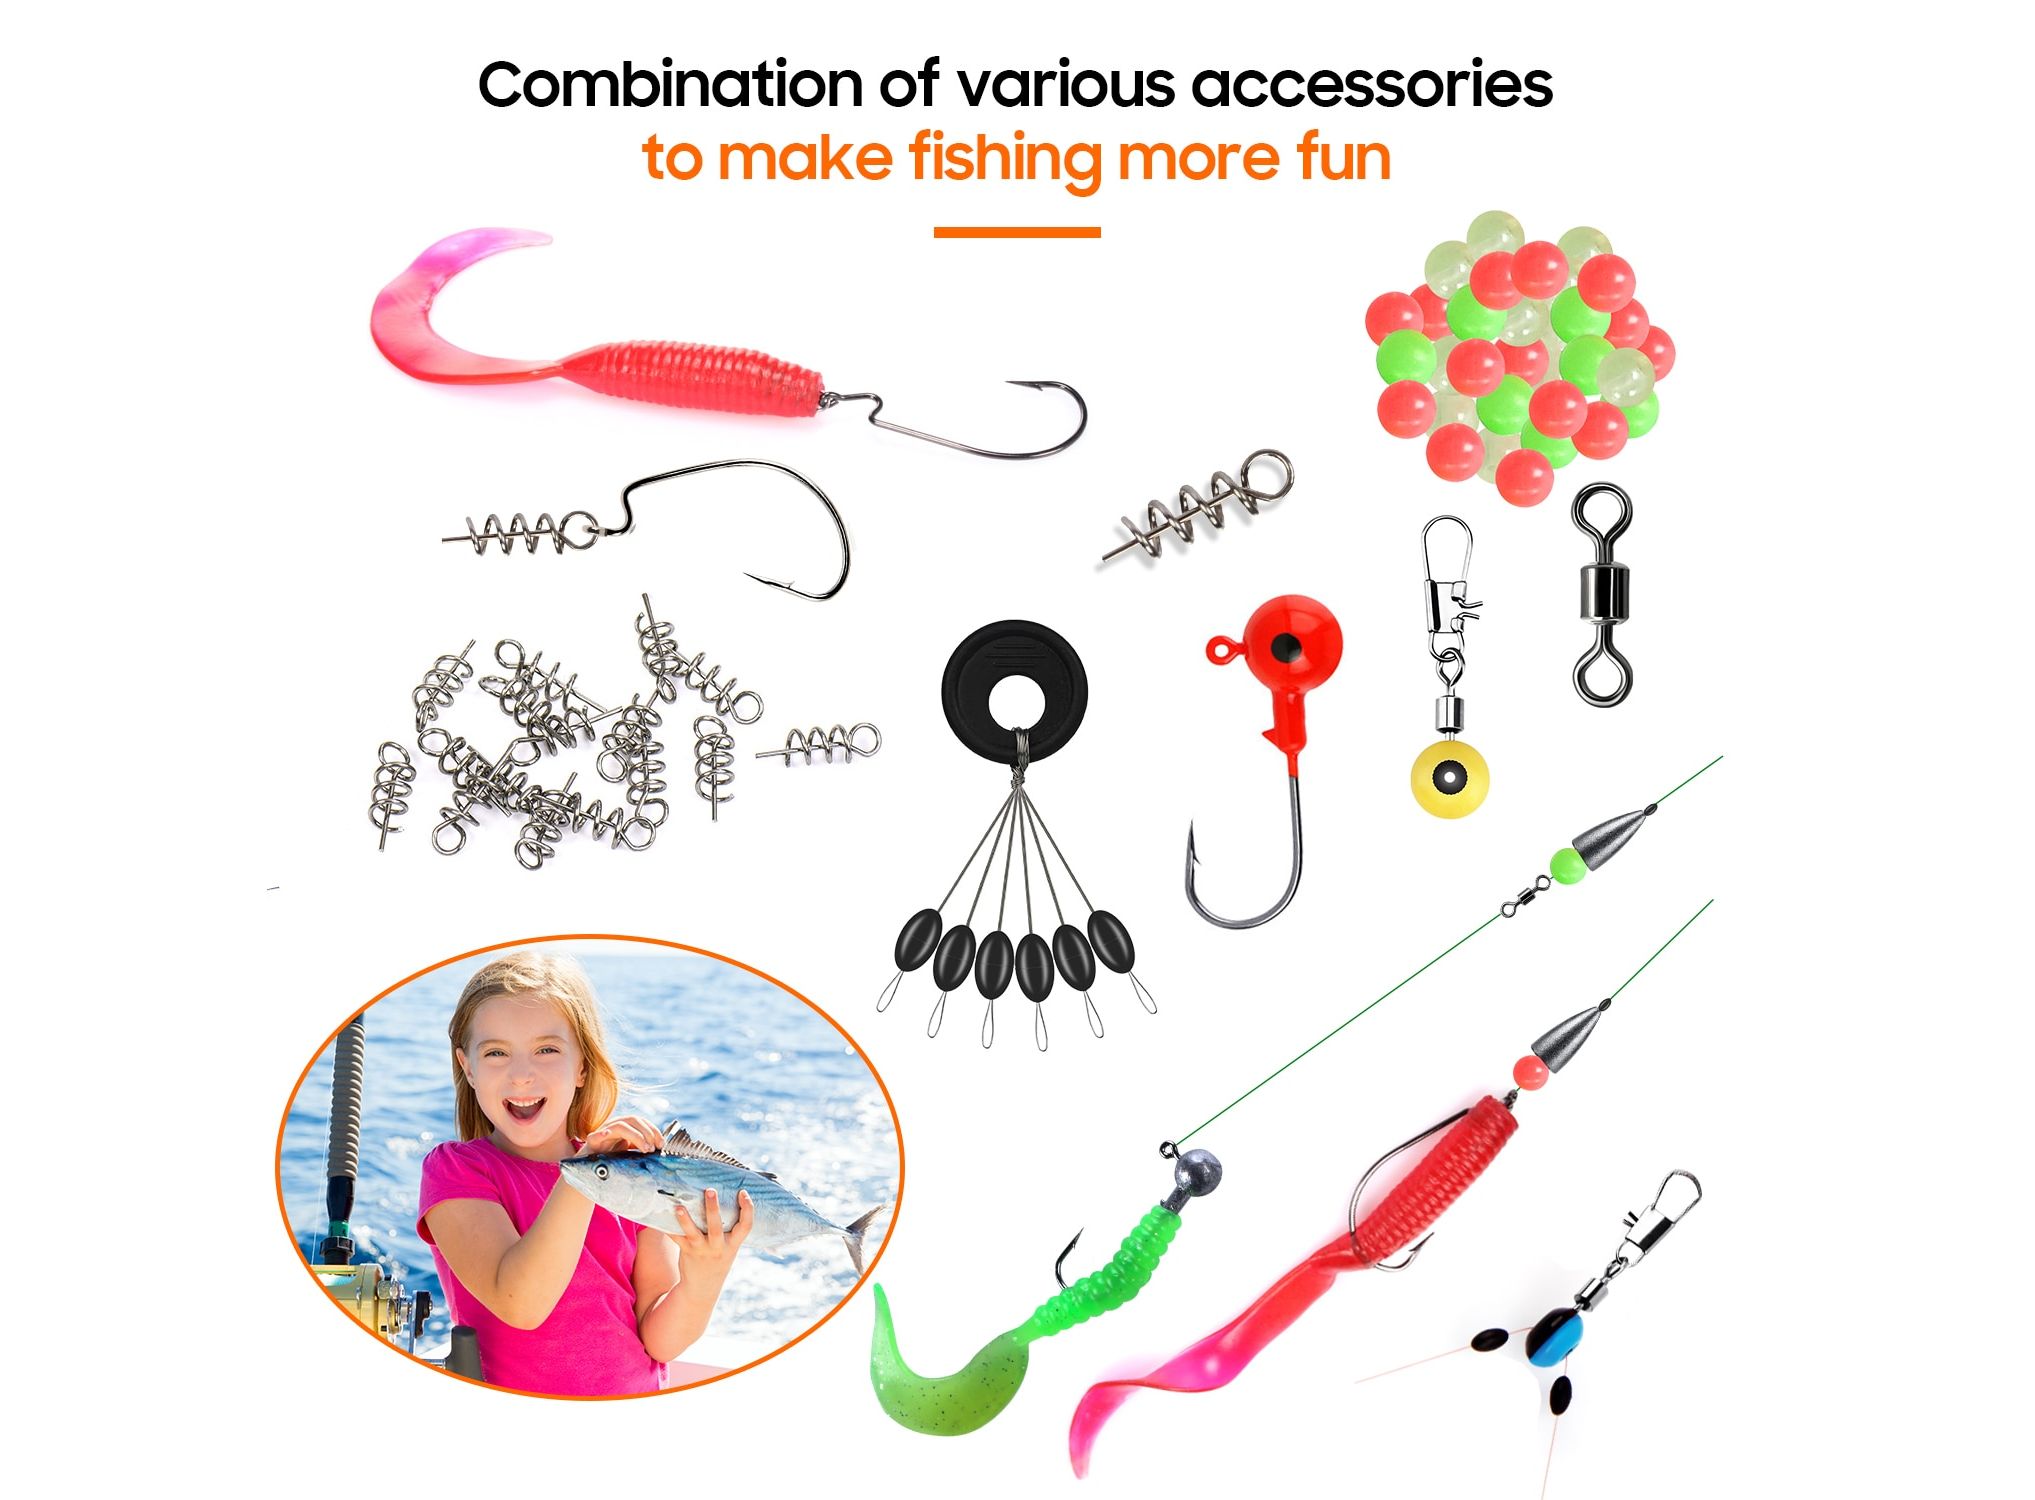 https://protechshop.co.uk/images/thumbnails/2035/1500/detailed/62/246pcs-box-Fishing-Tackles-Box-Accessories-Kit-Set-With-Hooks-Snap-Sinker-Weight-For-Carp-Bait_n96s-ky.jpg